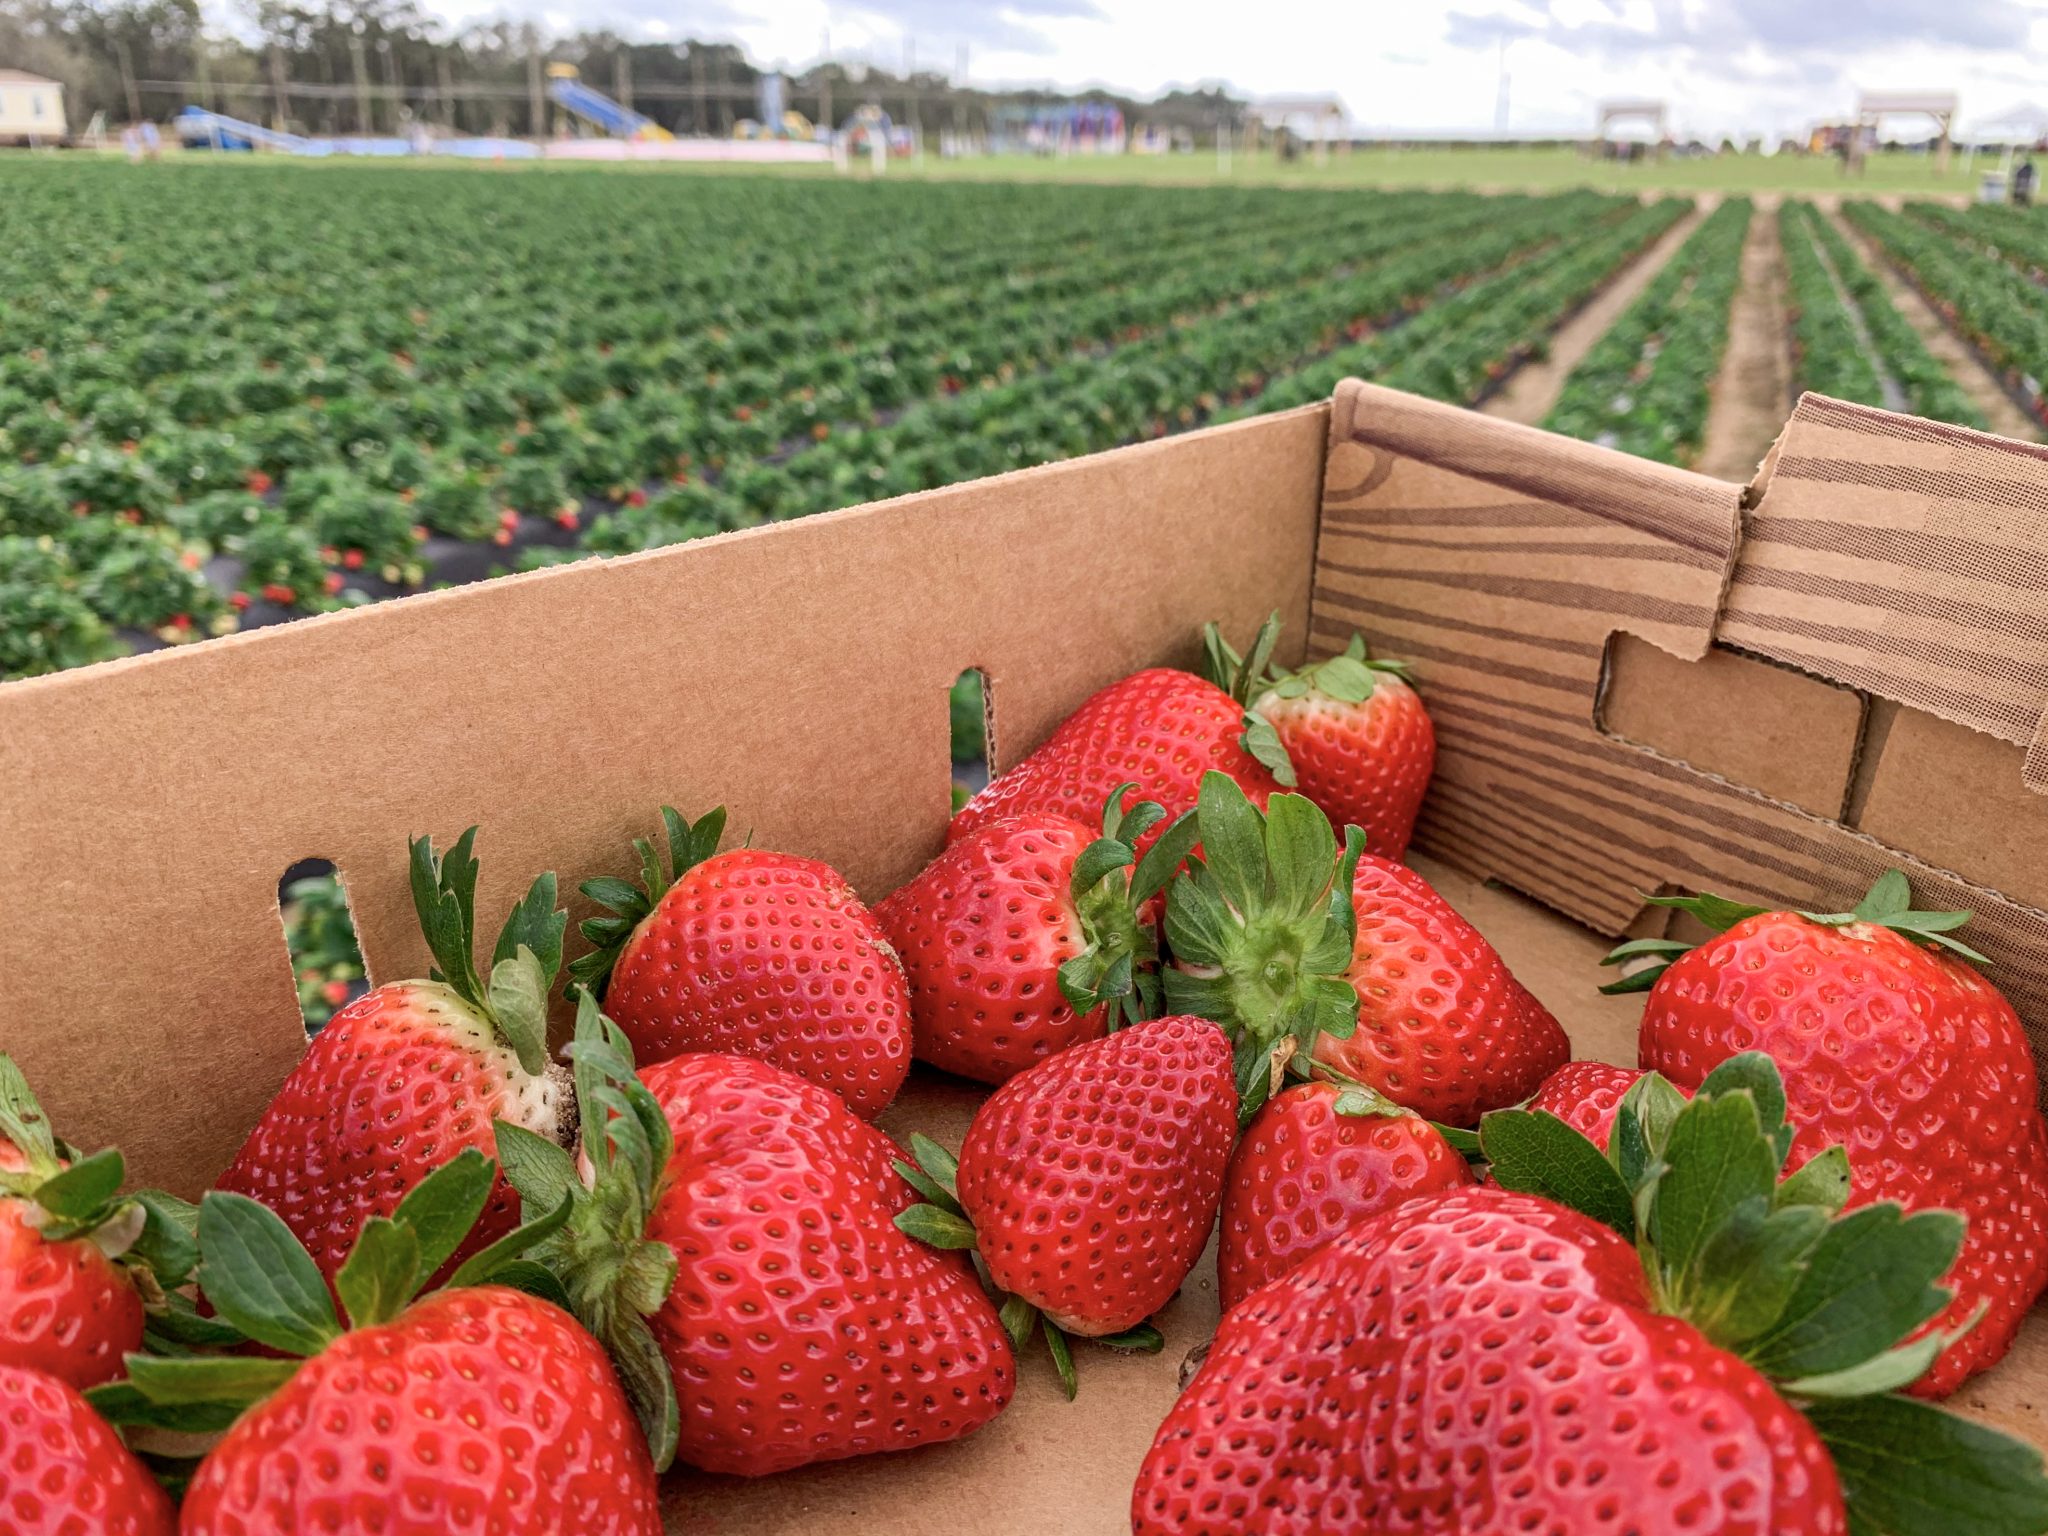 Strawberries in a box at a strawberry field